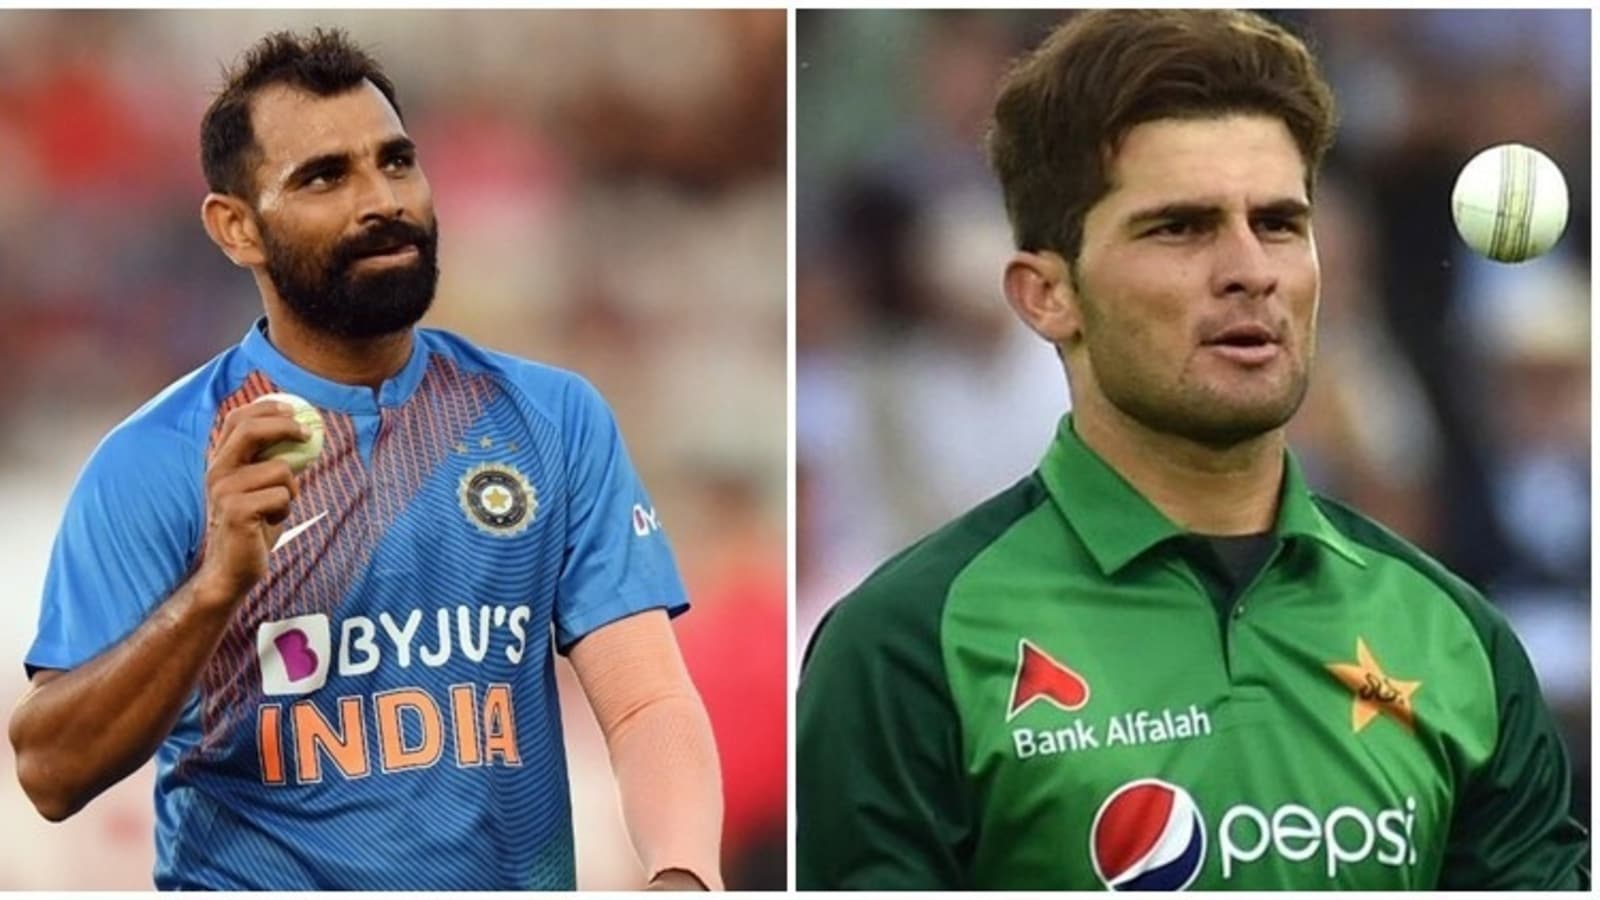 shaheen-afridi-s-return-not-as-good-as-shami-s-ex-india-coach-s-bold-claim-says-pakistan-will-be-worried-in-t20-wc